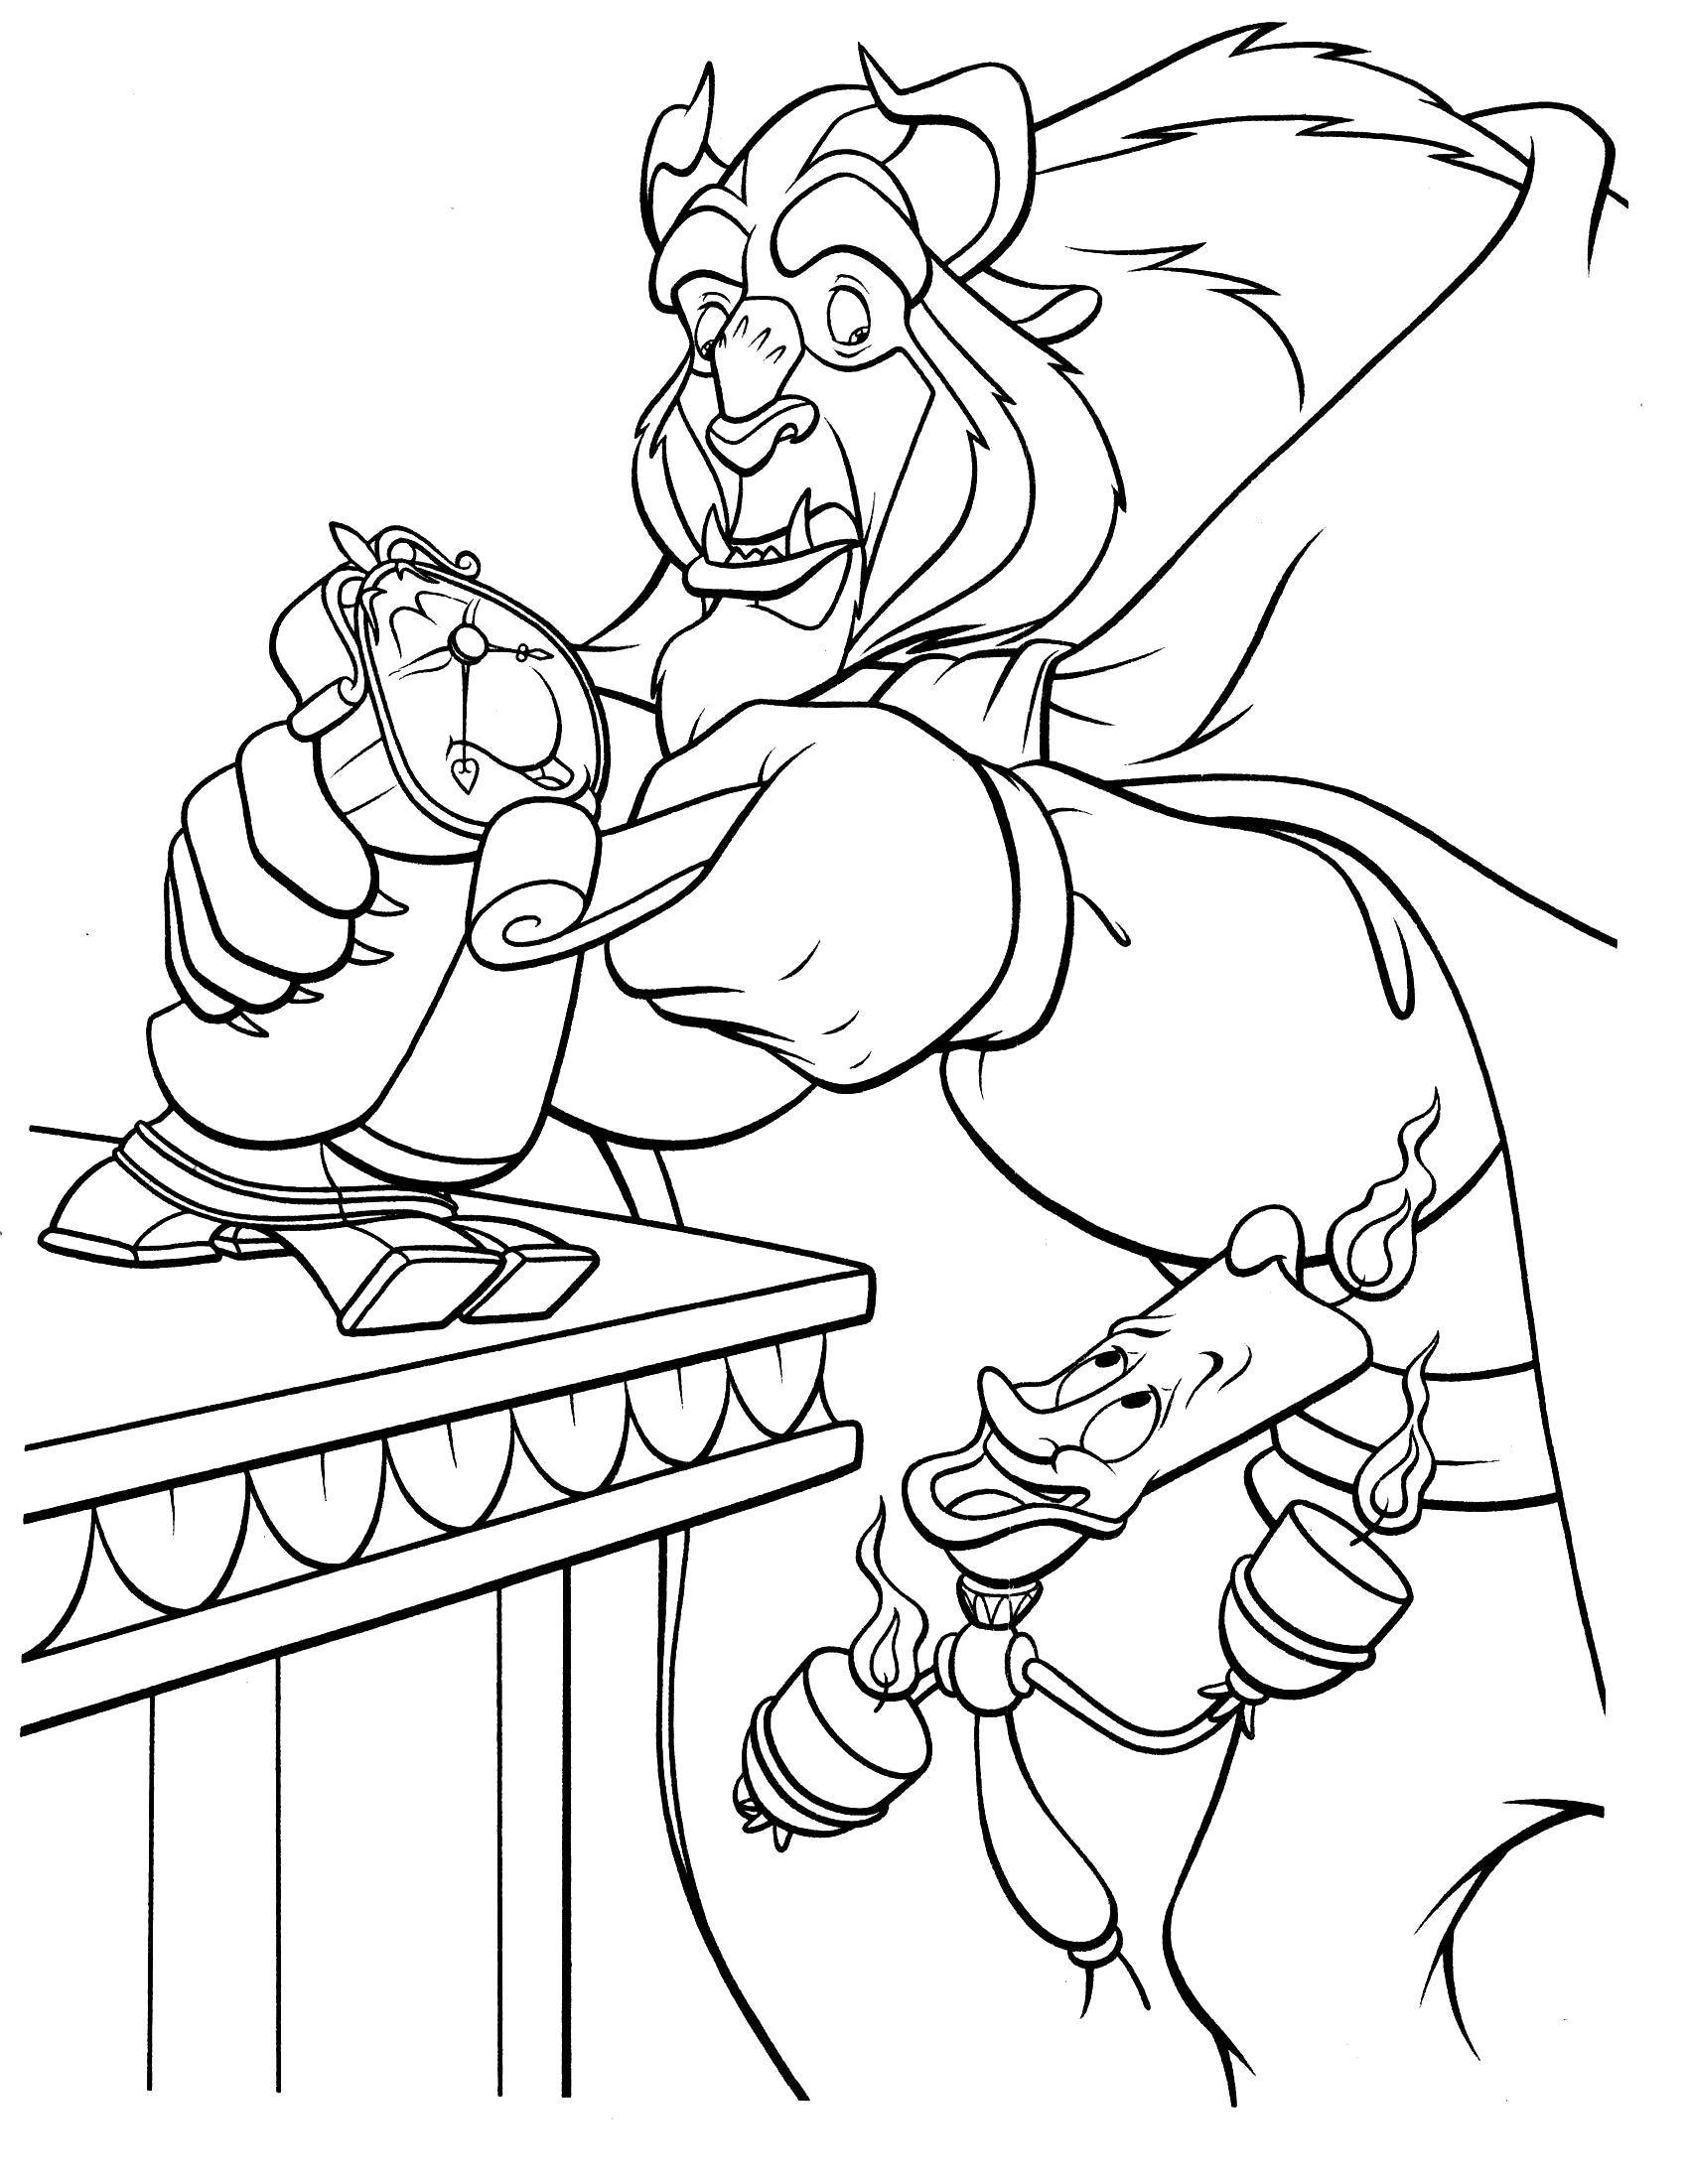 Coloring The characters in beauty and the beast. Category Disney cartoons. Tags:  Disney, "beauty and the beast".